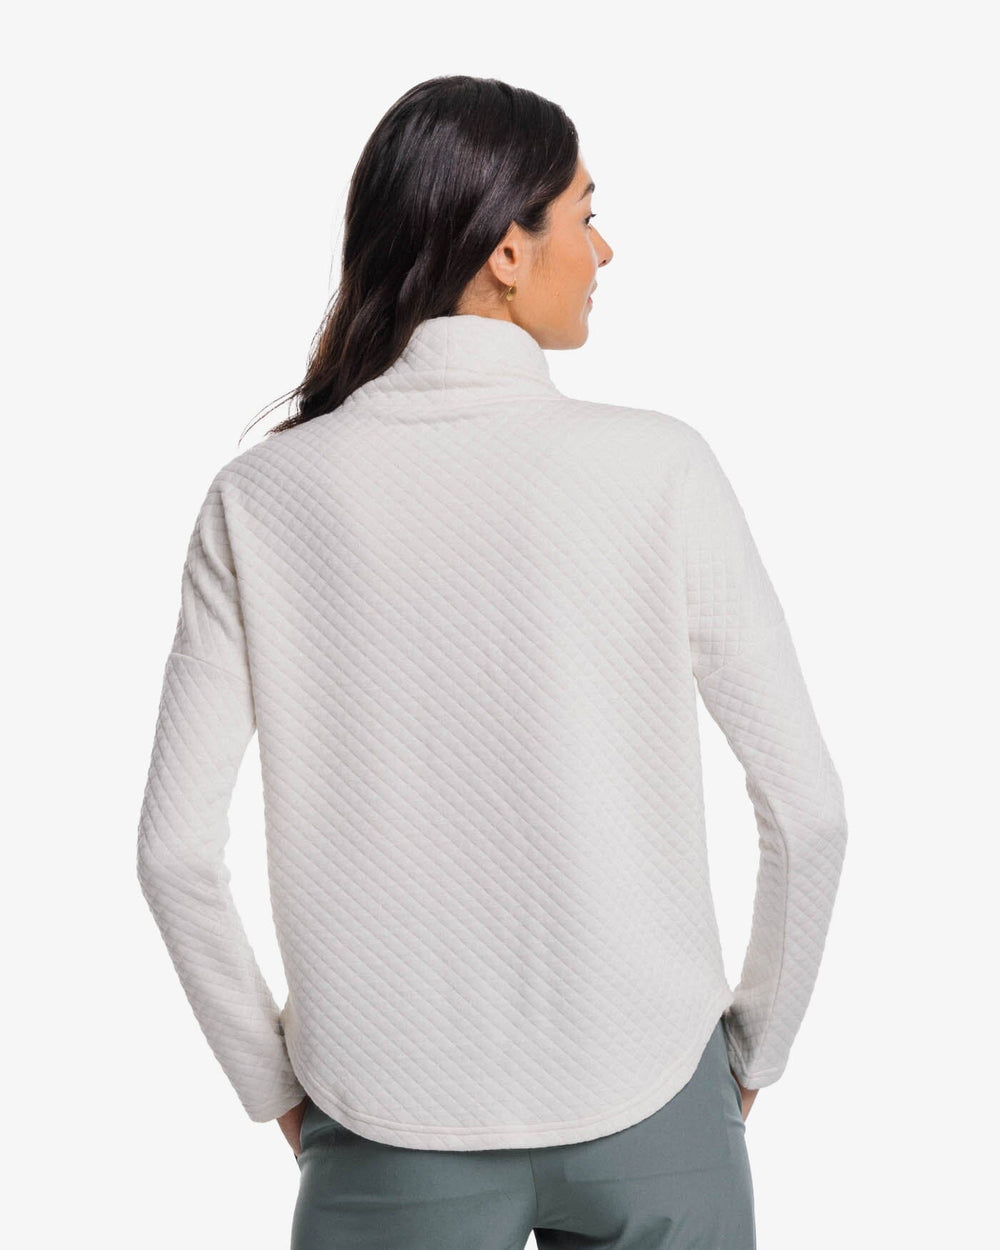 The back view of the Southern Tide Mellie MockNeck Sweatshirt by Southern Tide - Marshmallow